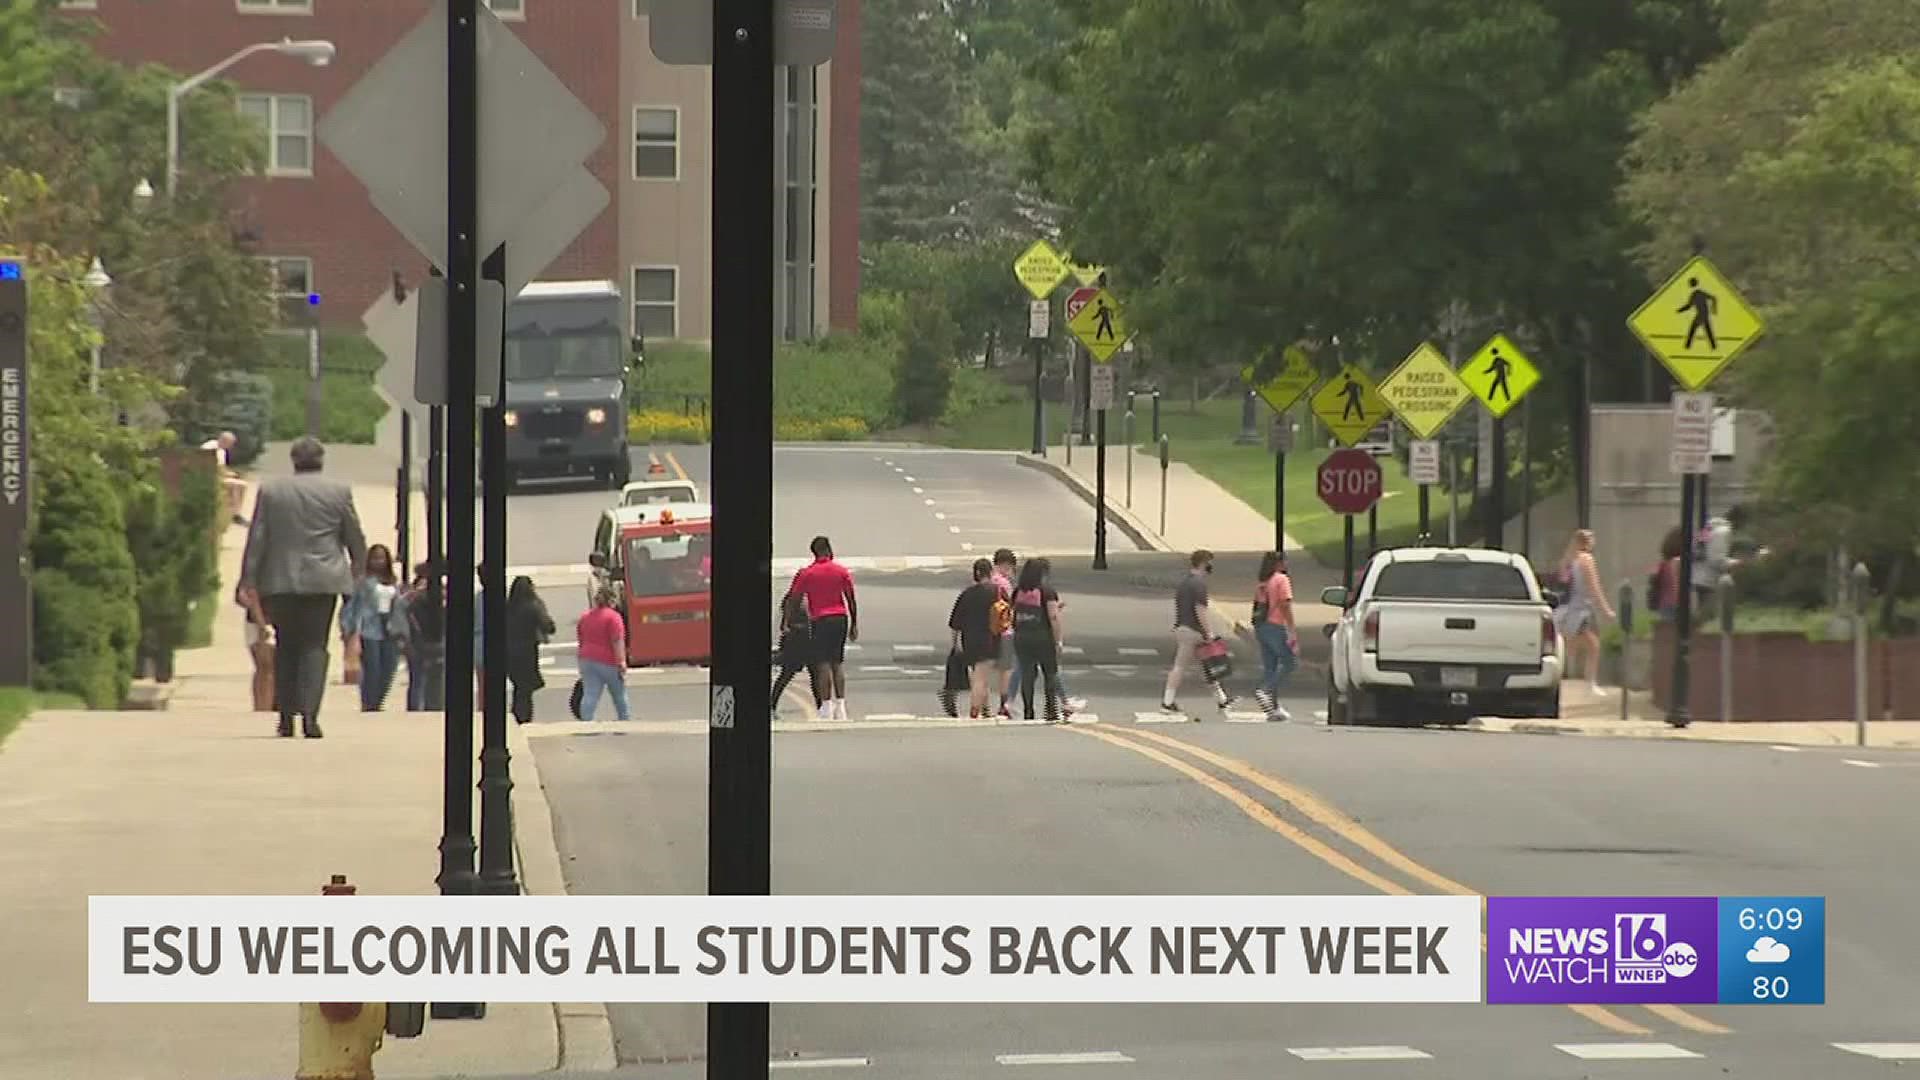 East Stroudsburg University officials explain what the campus will look like ahead of all students returning for the fall semester.